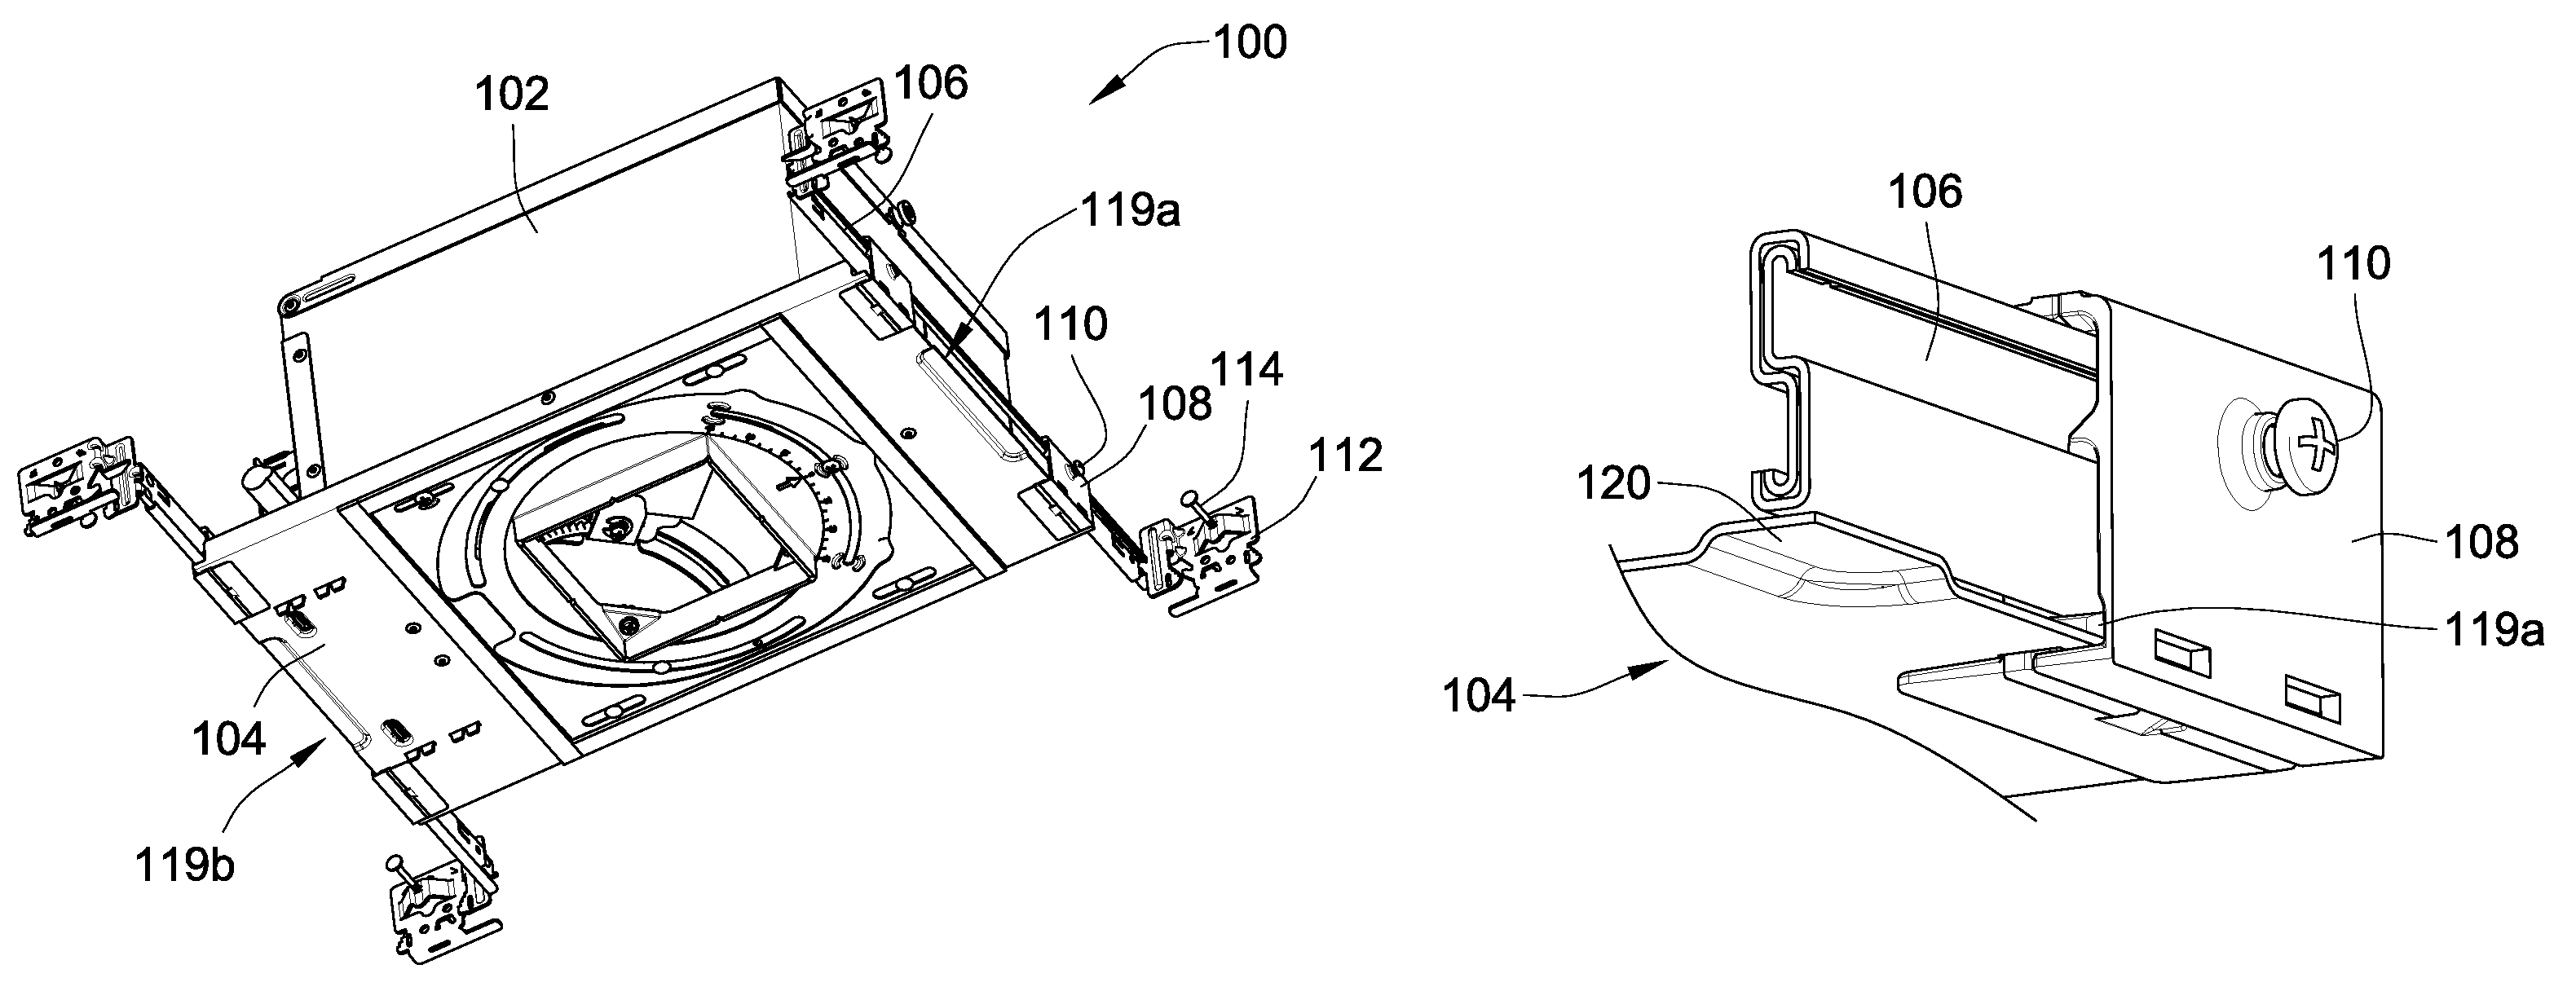 Telescoping mounting system for a recessed luminaire